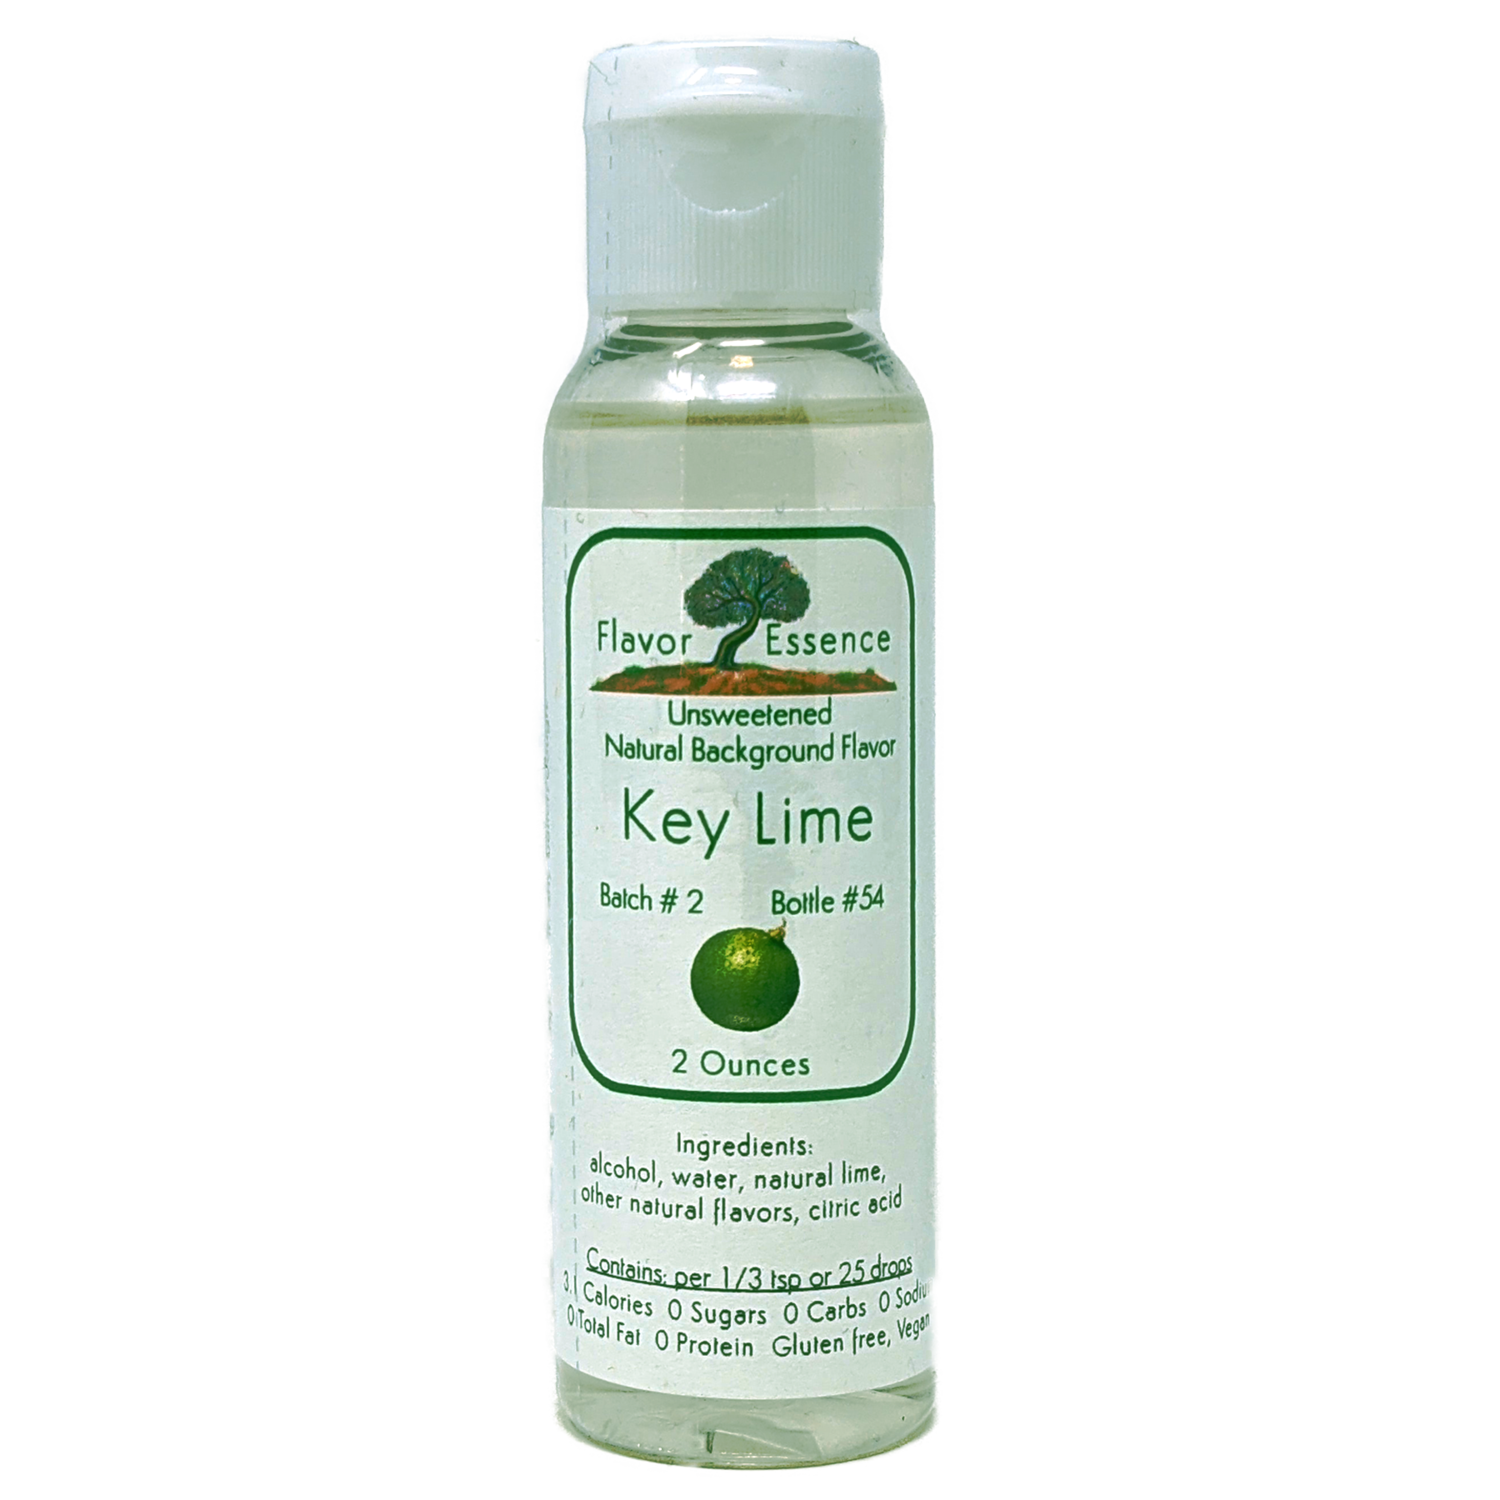 Flavor Essence KEY LIME 2oz - Natural Unsweetened-Background-Flavoring